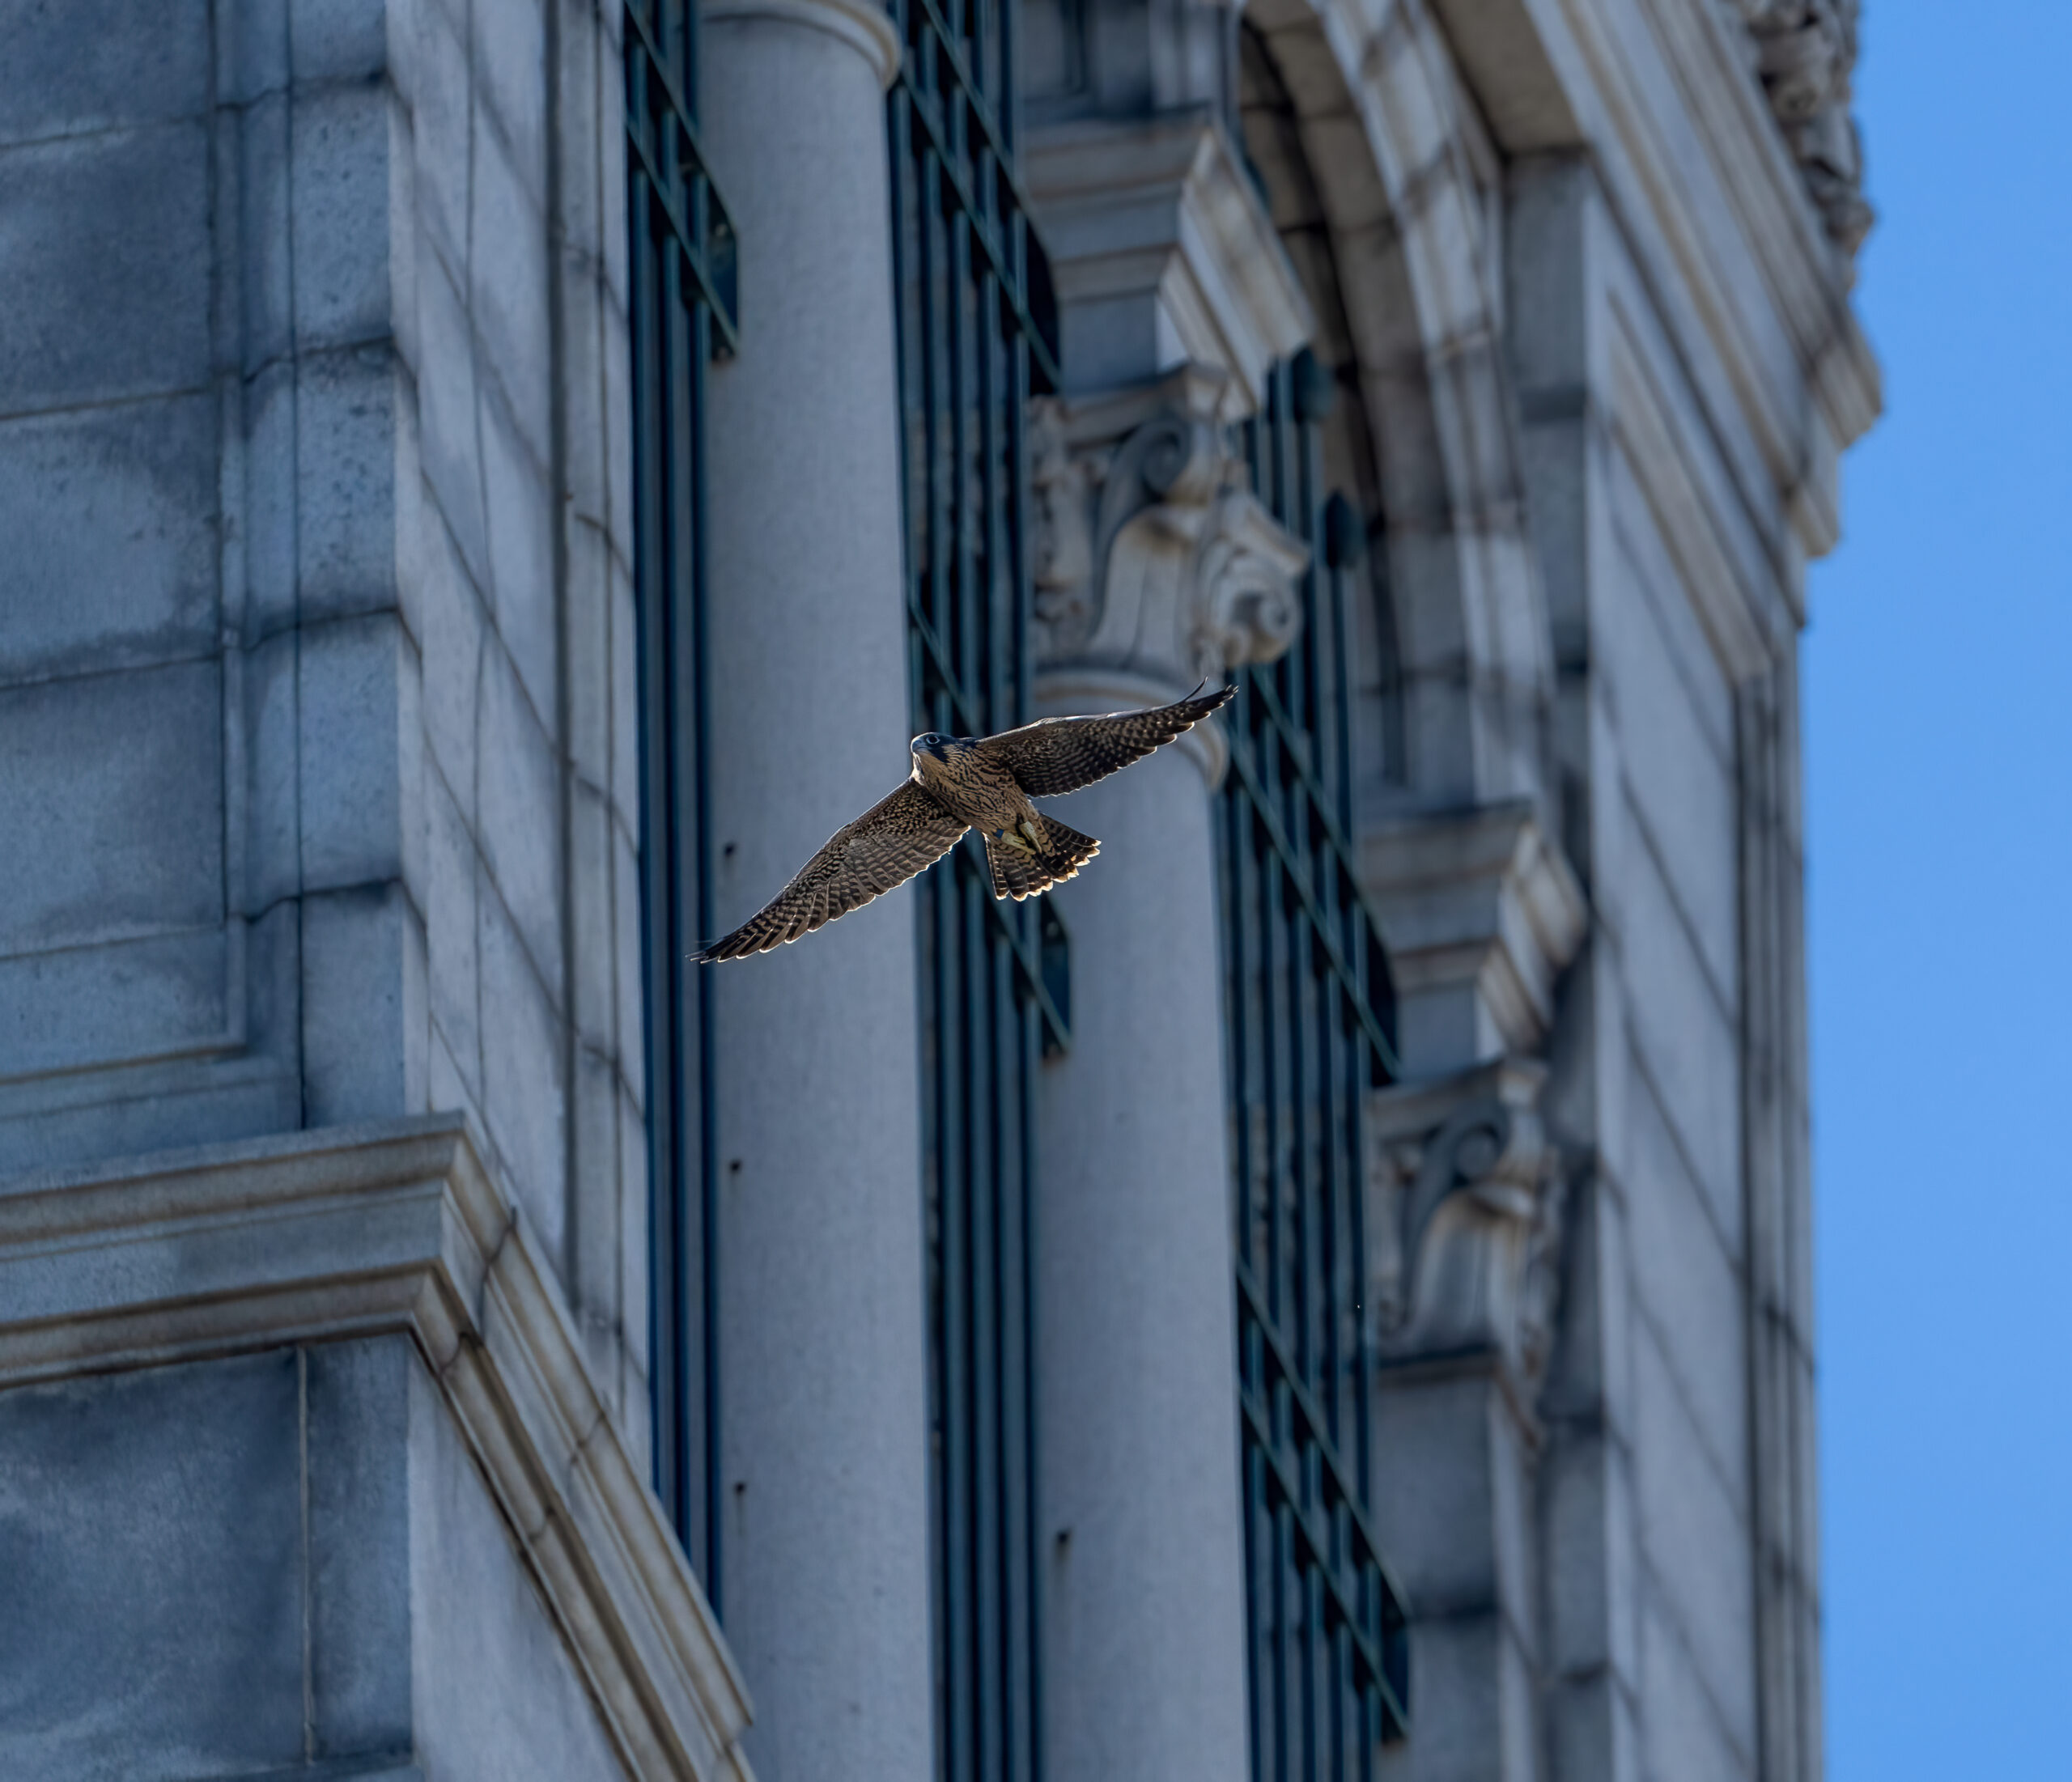 Nox, the smallest and youngest of the new falcons on campus, flies past the observation deck level of the Campanile.